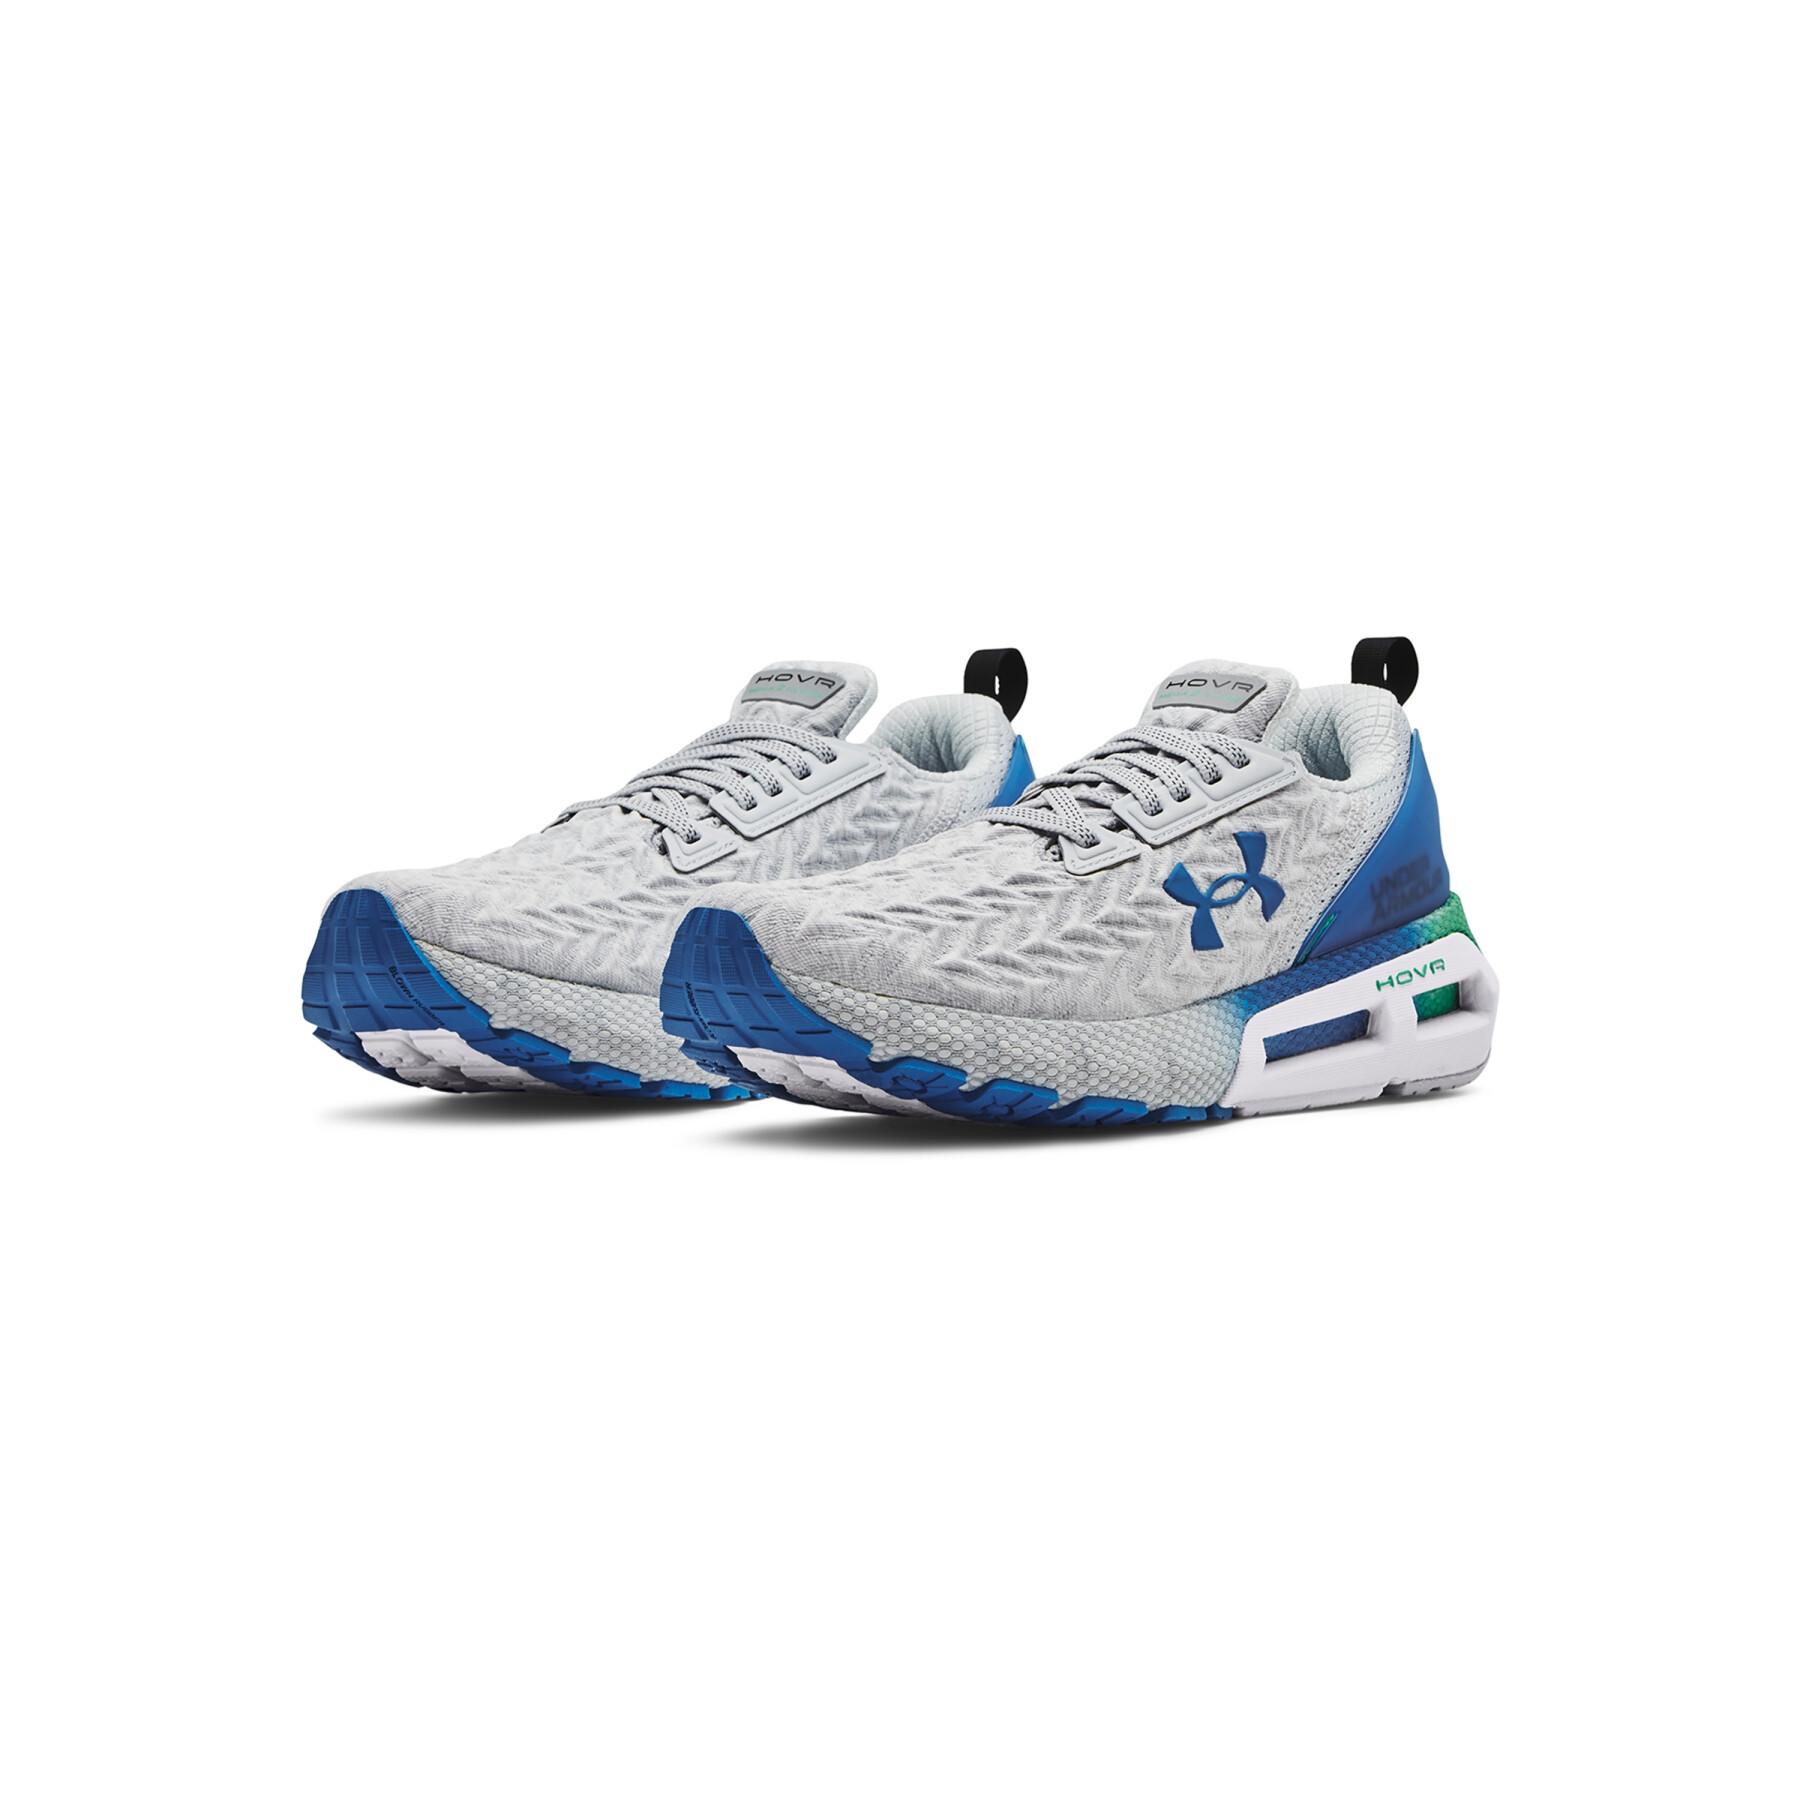 Running shoes Under Armour HOVR™ Mega 2 Clone